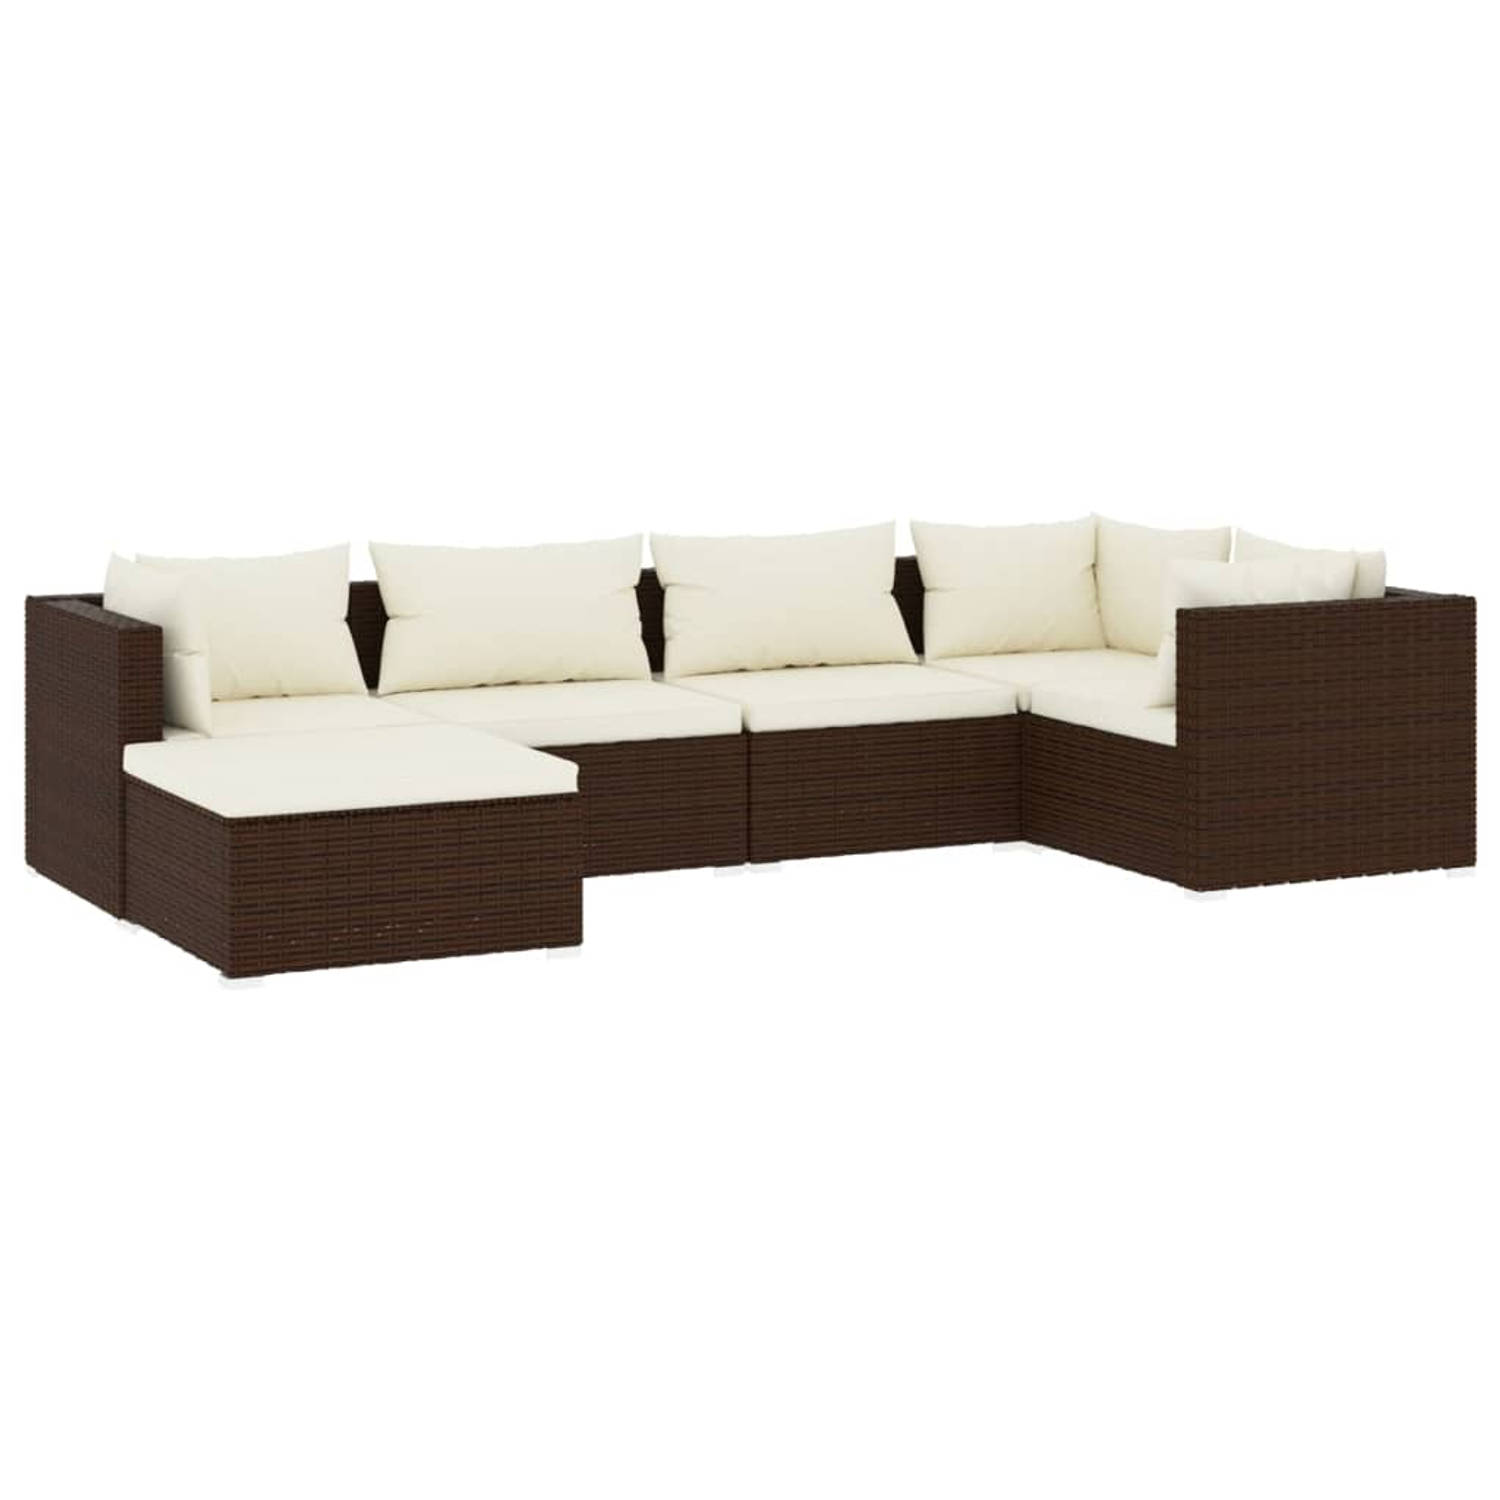 The Living Store Poly Rattan Tuinset - Modulair Design - Bruin - 70 x 70 x 60.5 cm - Inclusief Kussens